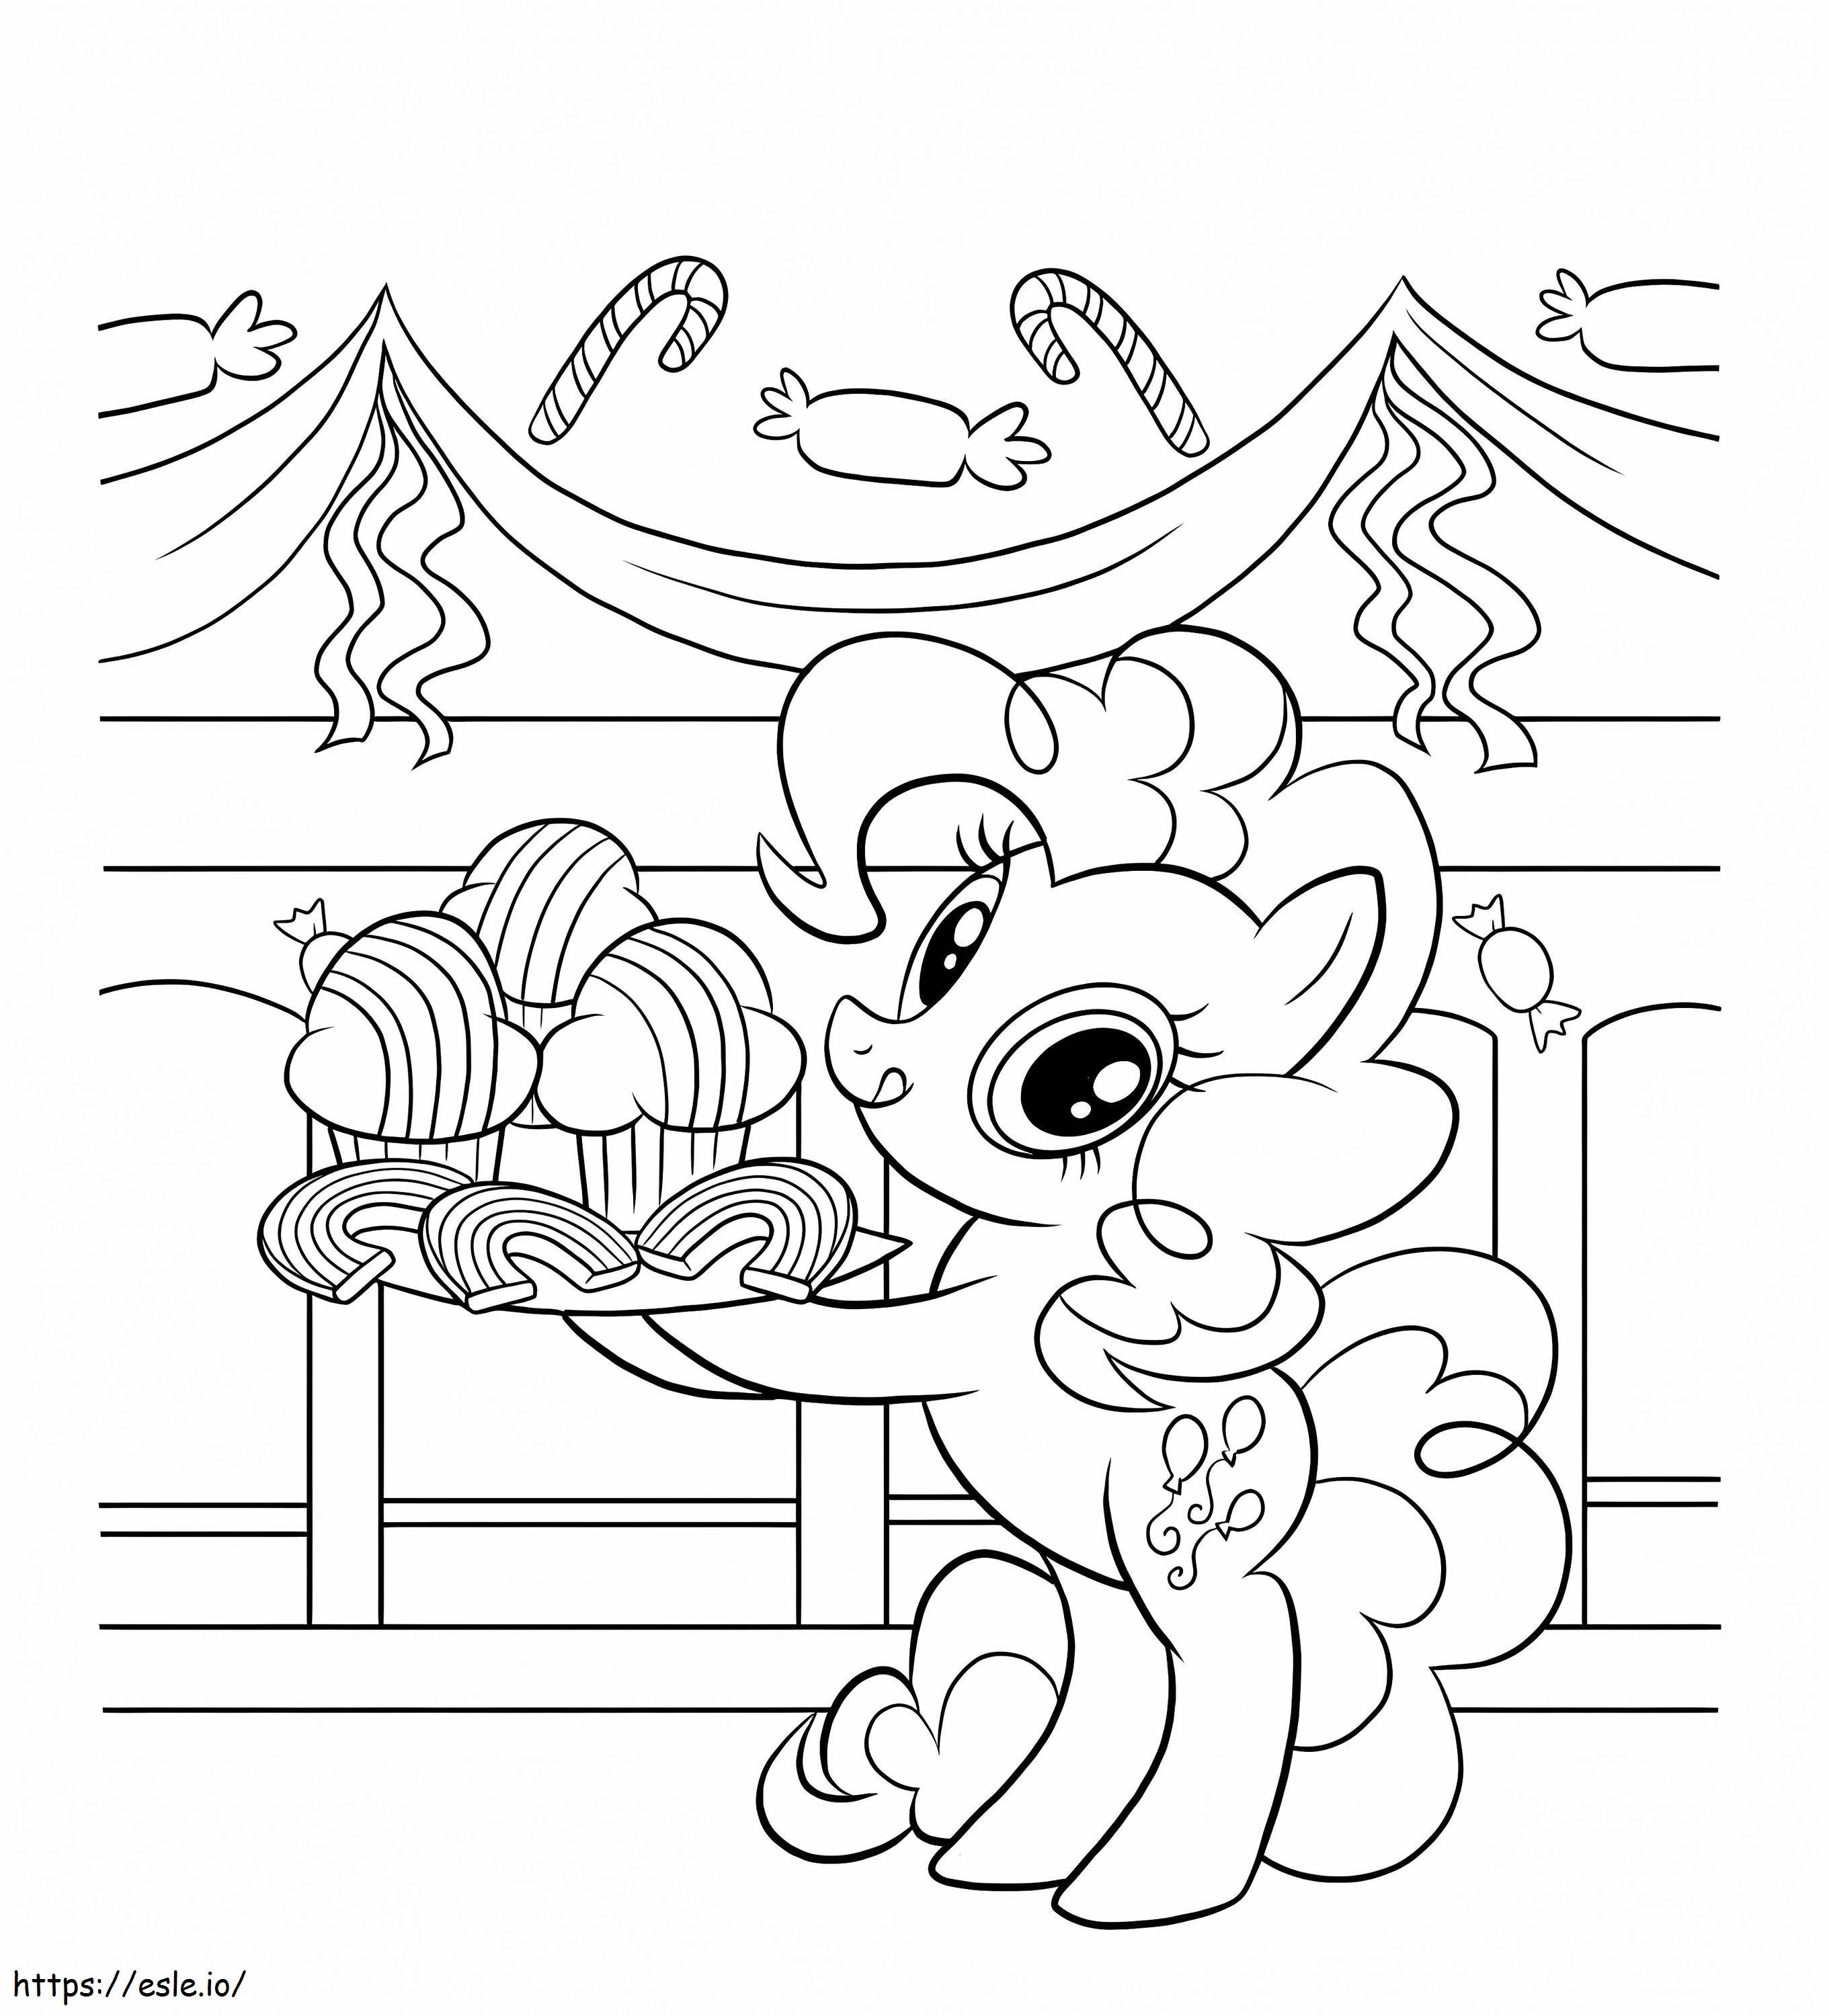 Pinkie Pie And Sweets coloring page